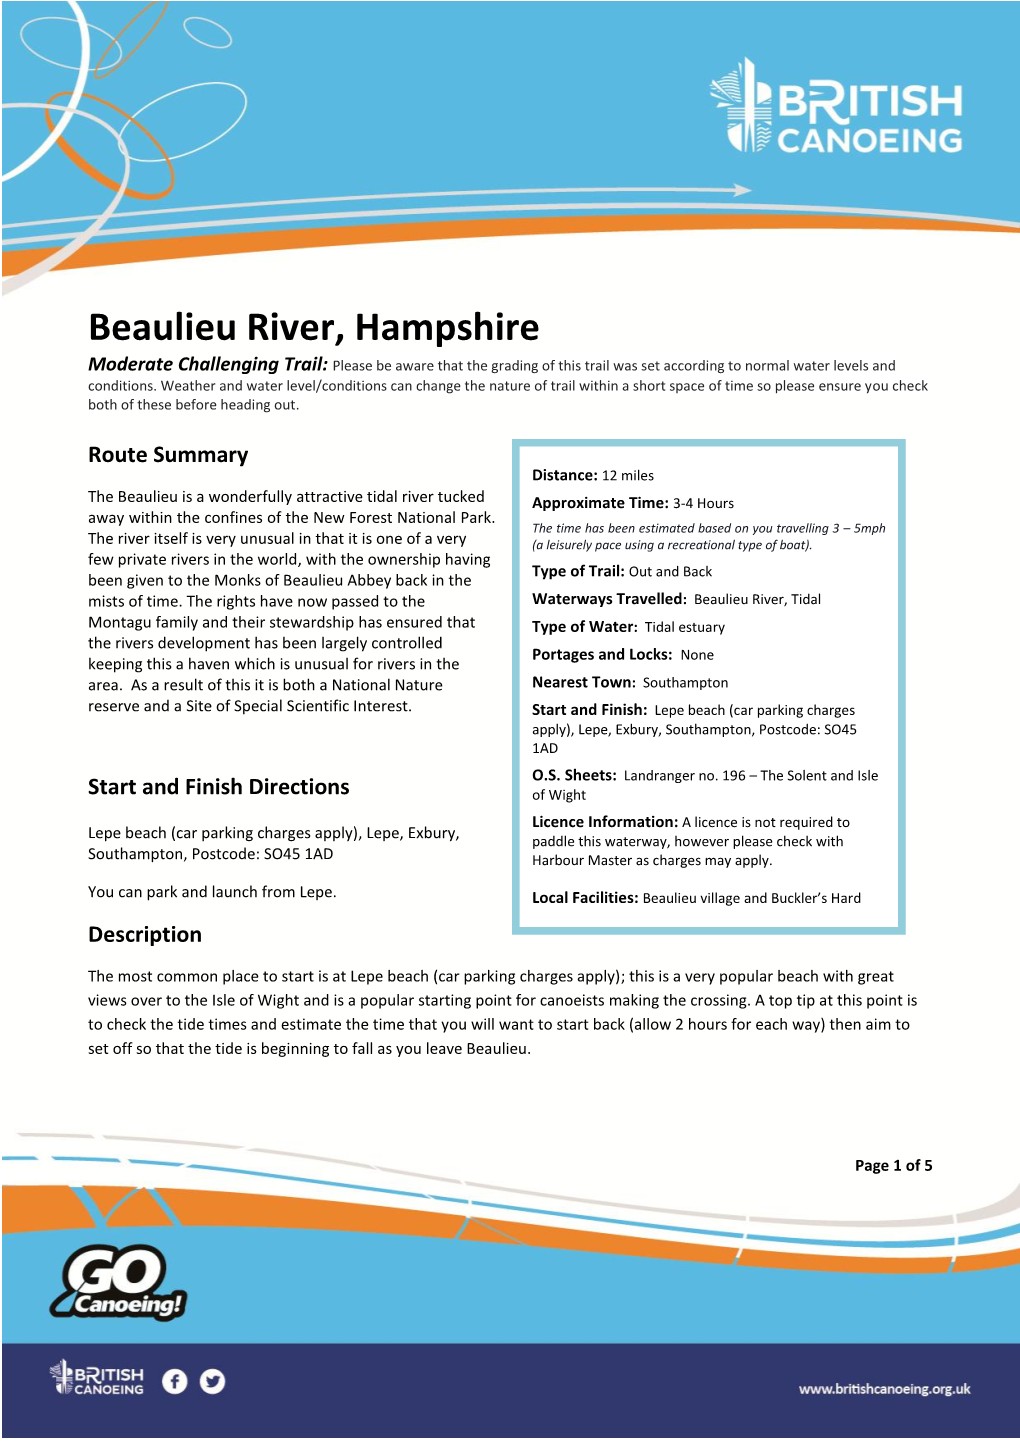 Beaulieu River, Hampshire Moderate Challenging Trail: Please Be Aware That the Grading of This Trail Was Set According to Normal Water Levels and Conditions